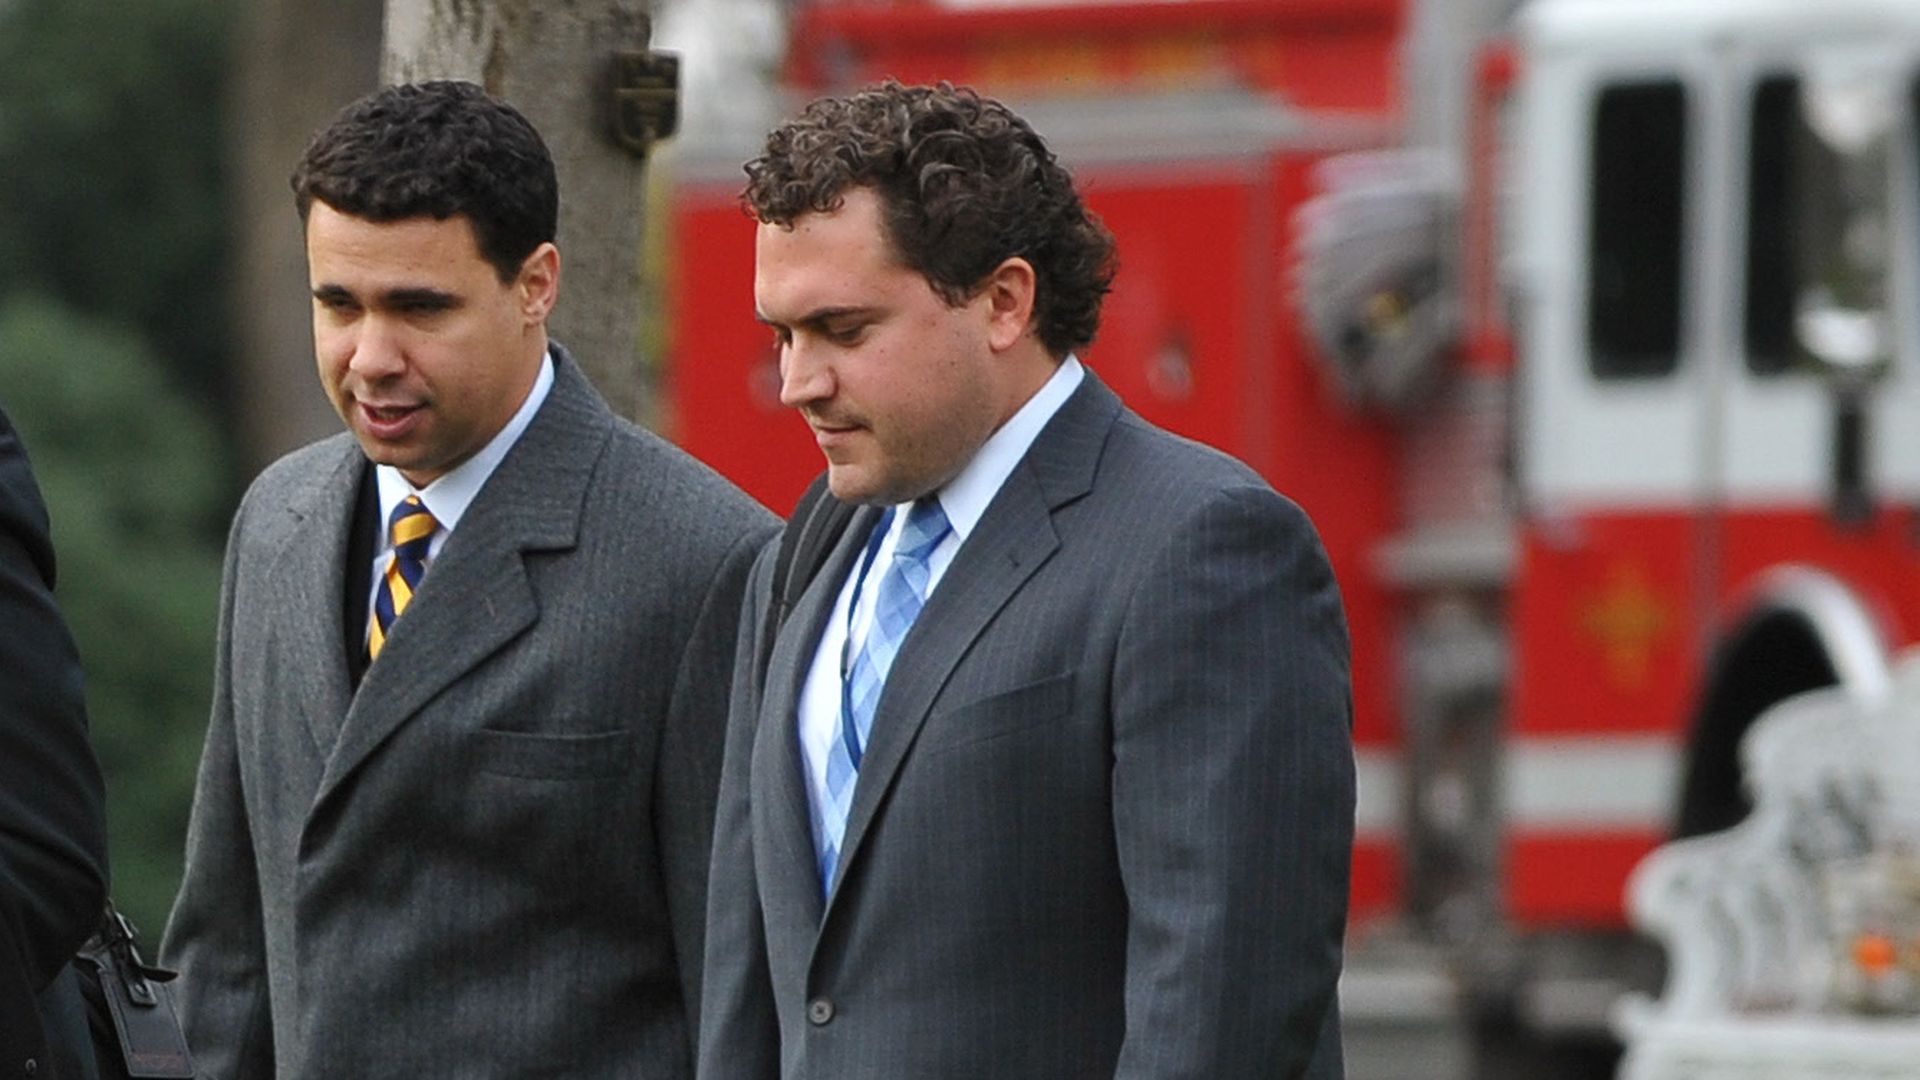 Cody Keenan (right) is seen heading to Marine One in December 2009